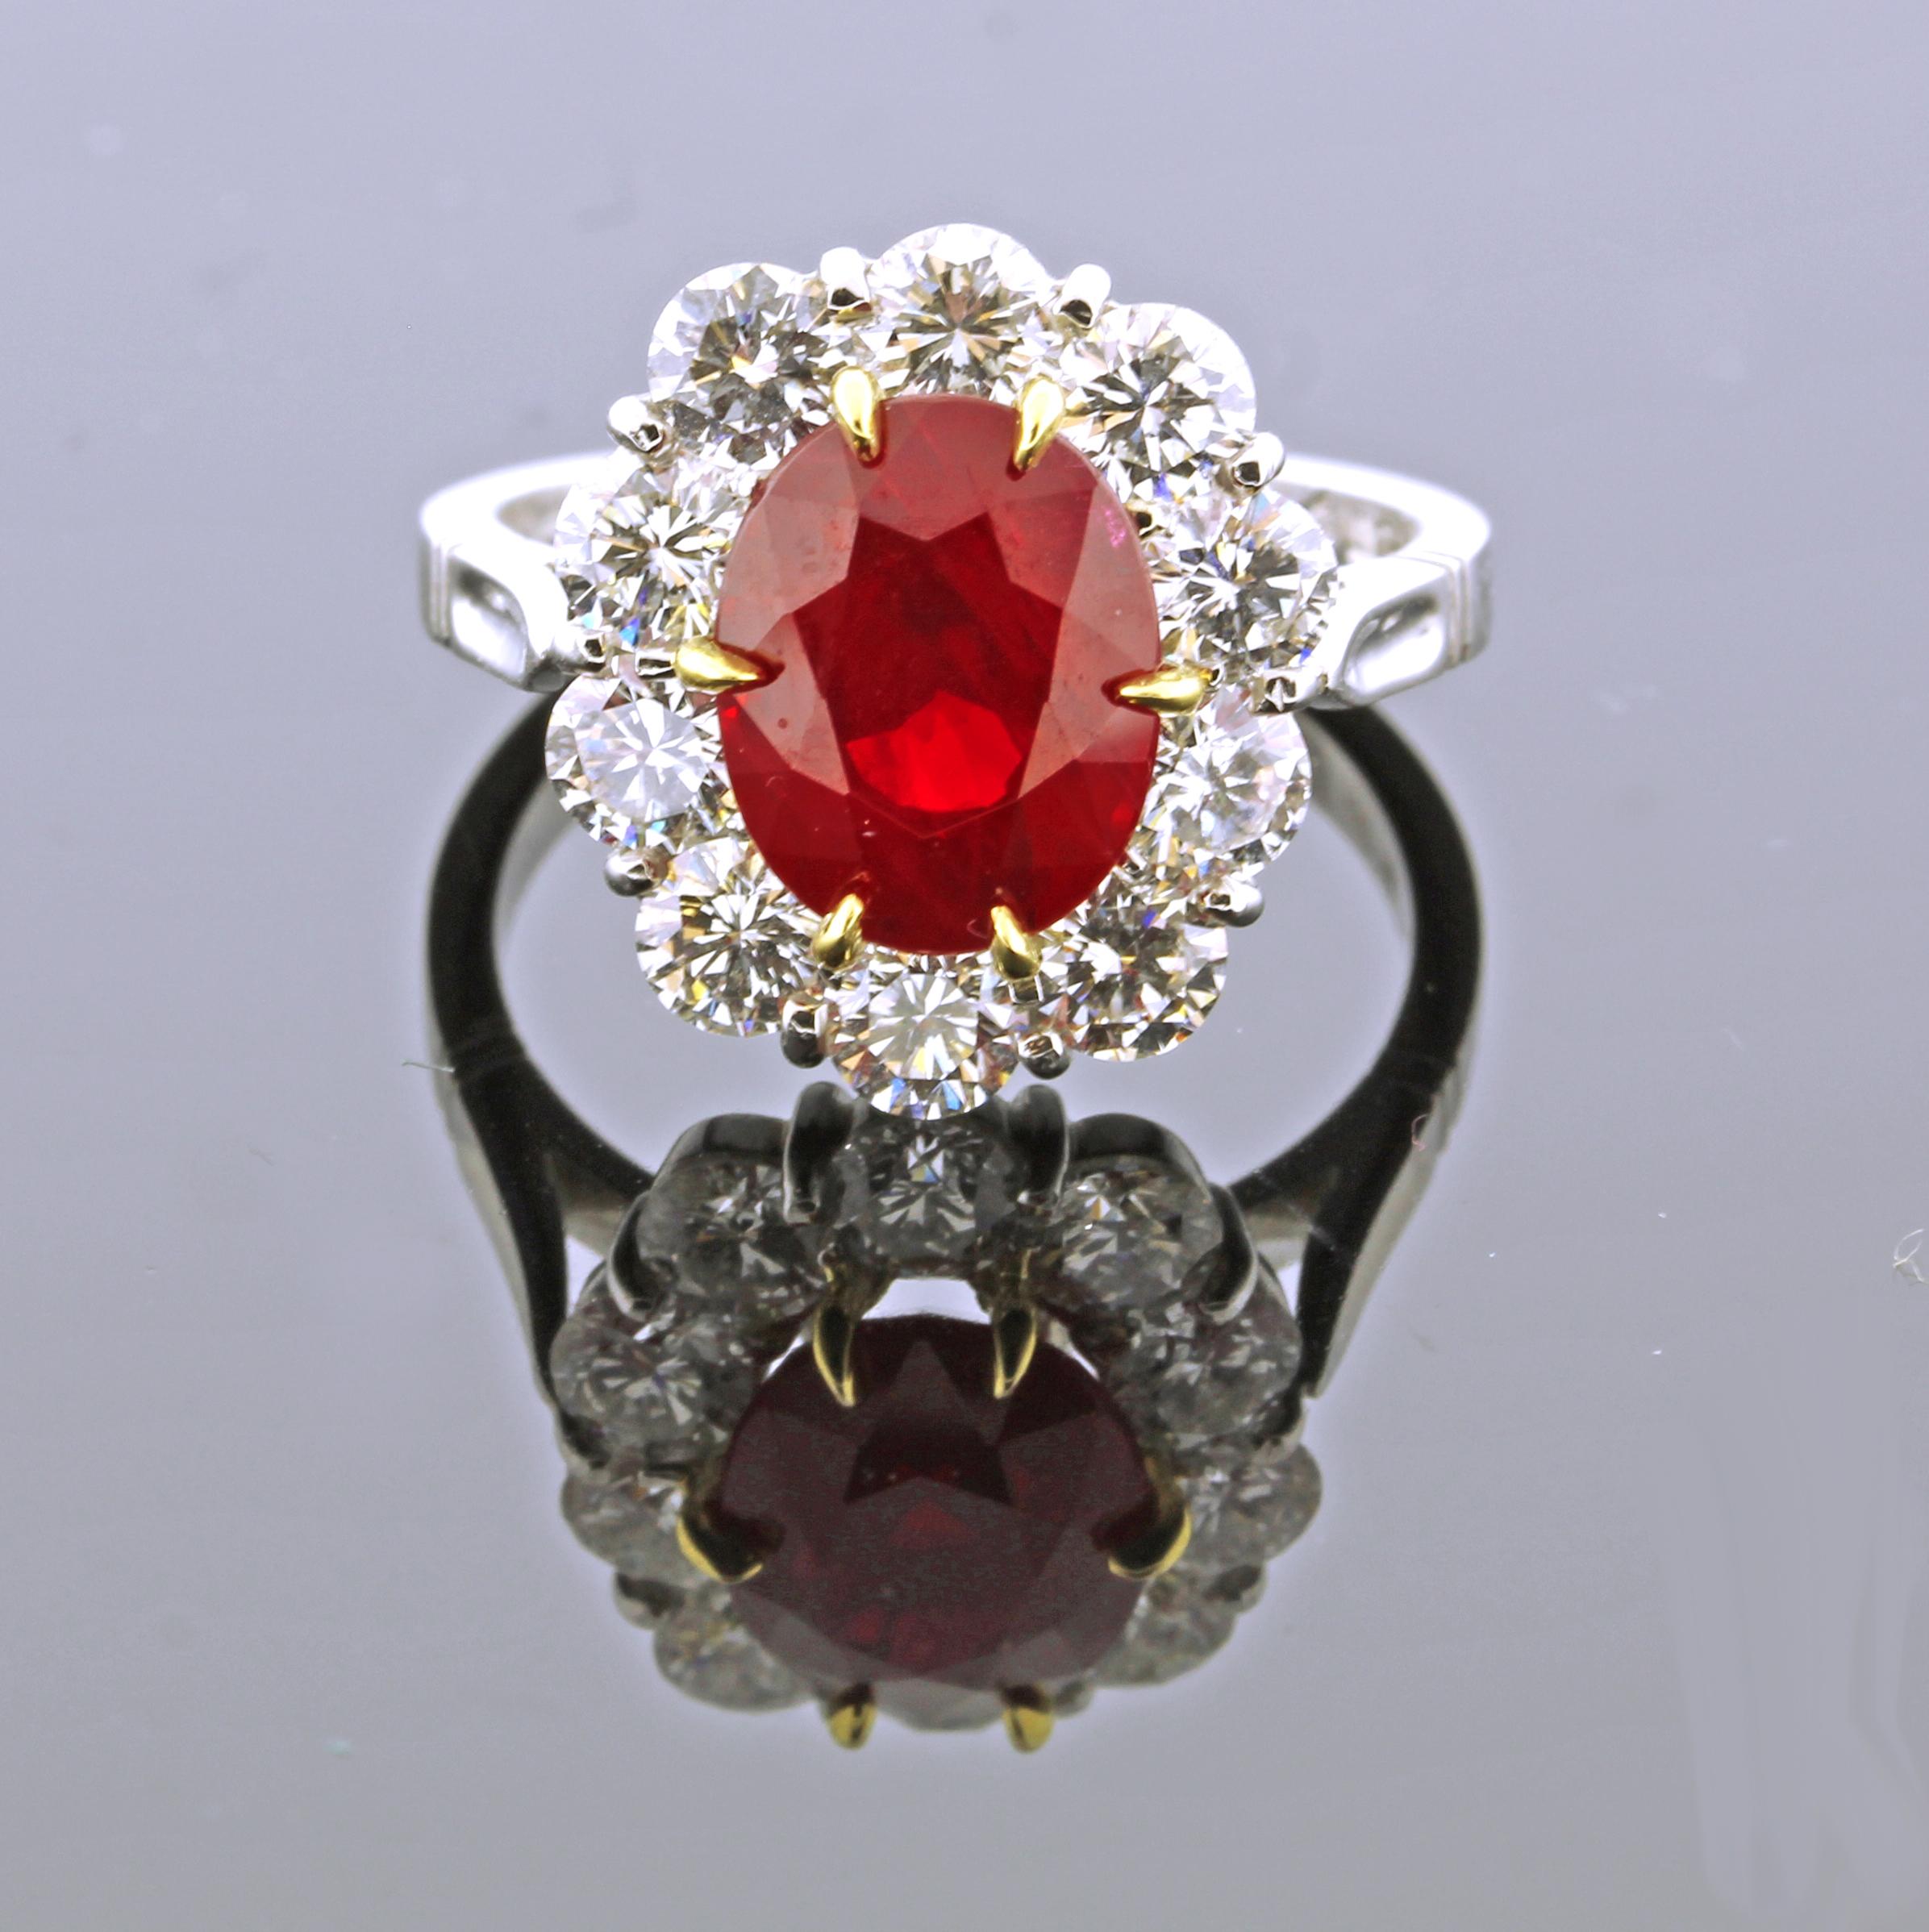 From the master ring makers of Pampillonia. an oval Burma ruby surrounded by diamonds. The ruby is a pure red color with no overtones
♦ Designer: Pampillonia
♦ Metal: Platinum, 18 karat gold
♦ Burma Ruby=3.19 A G L certified, standard heat